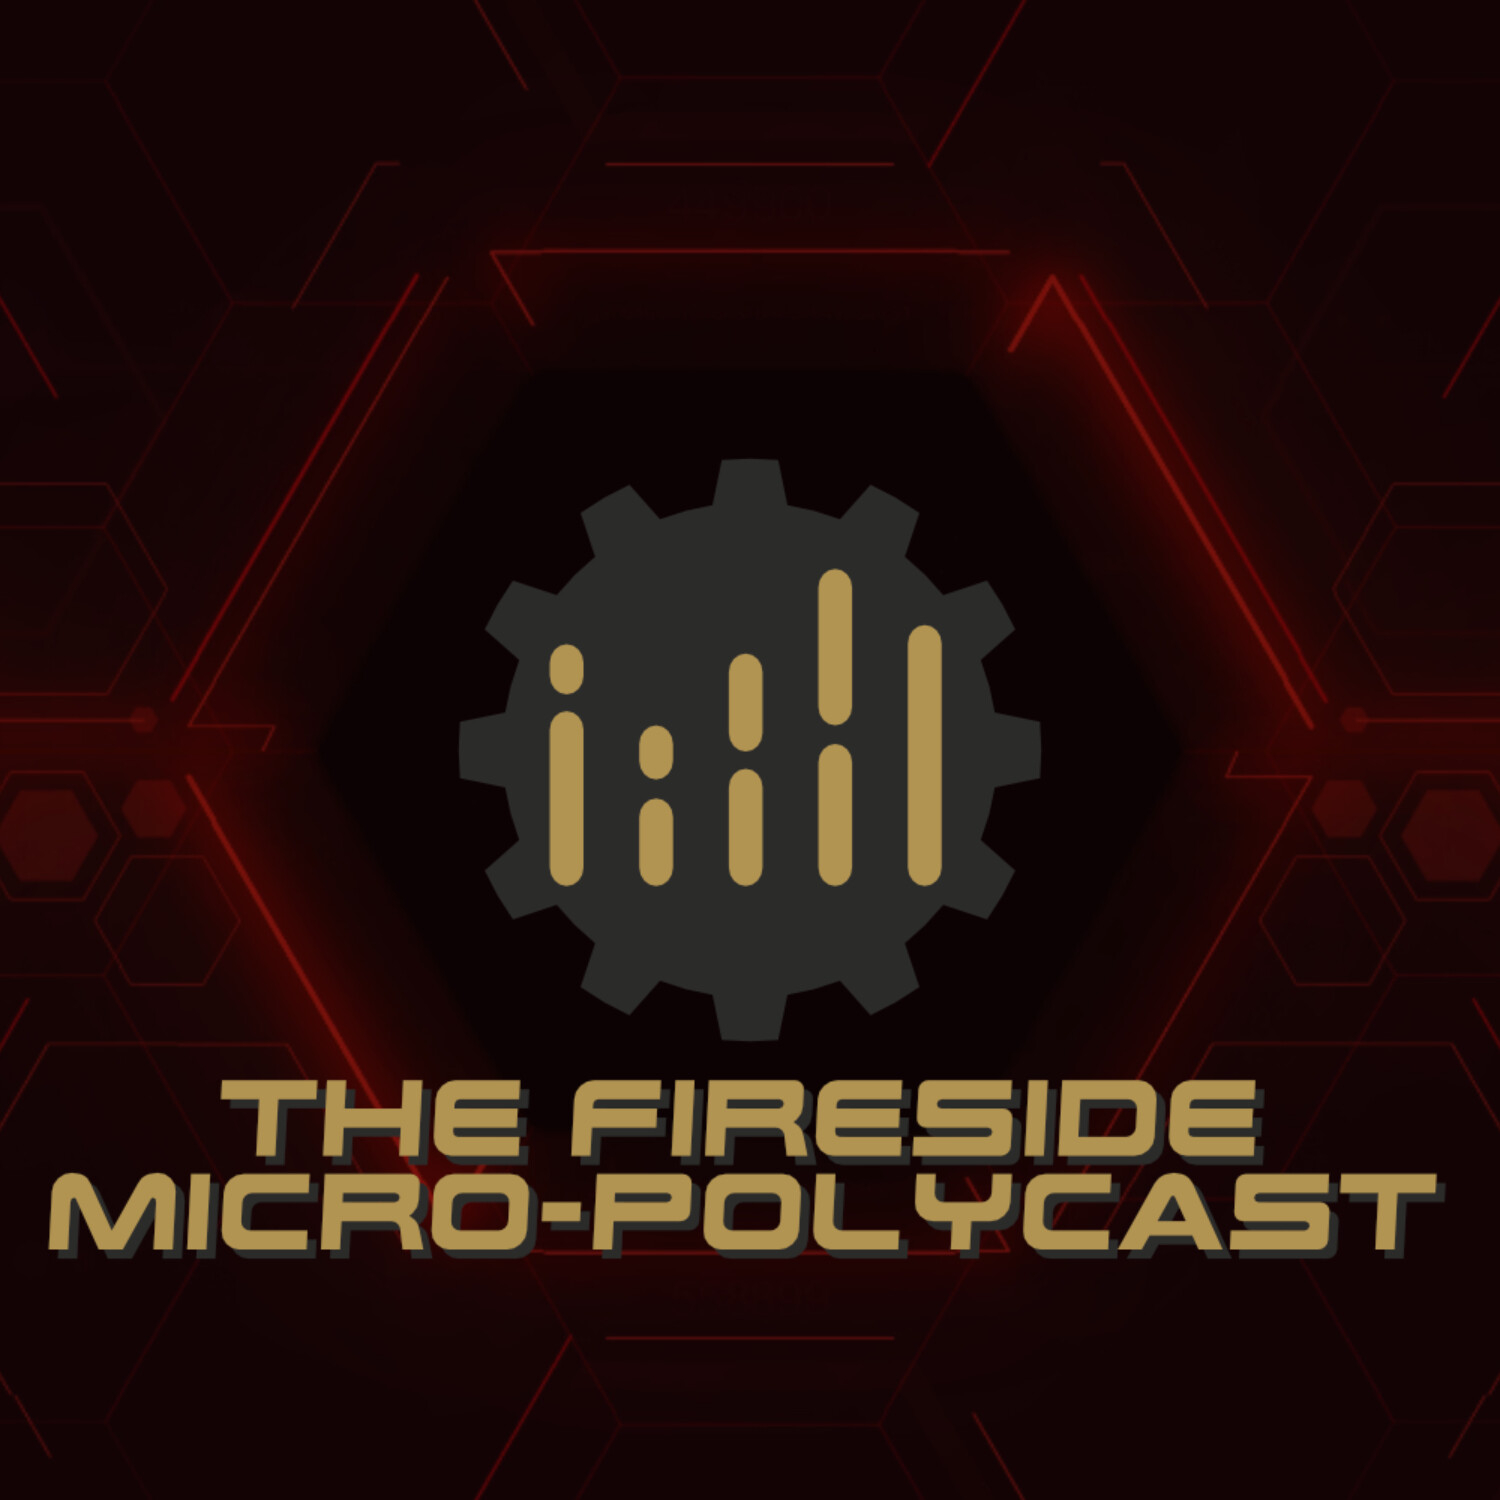 Changing the PolyCast, Podcast Movement Conference, and Moving the PolyInContent Series?? #FiresideMicroPolyCast